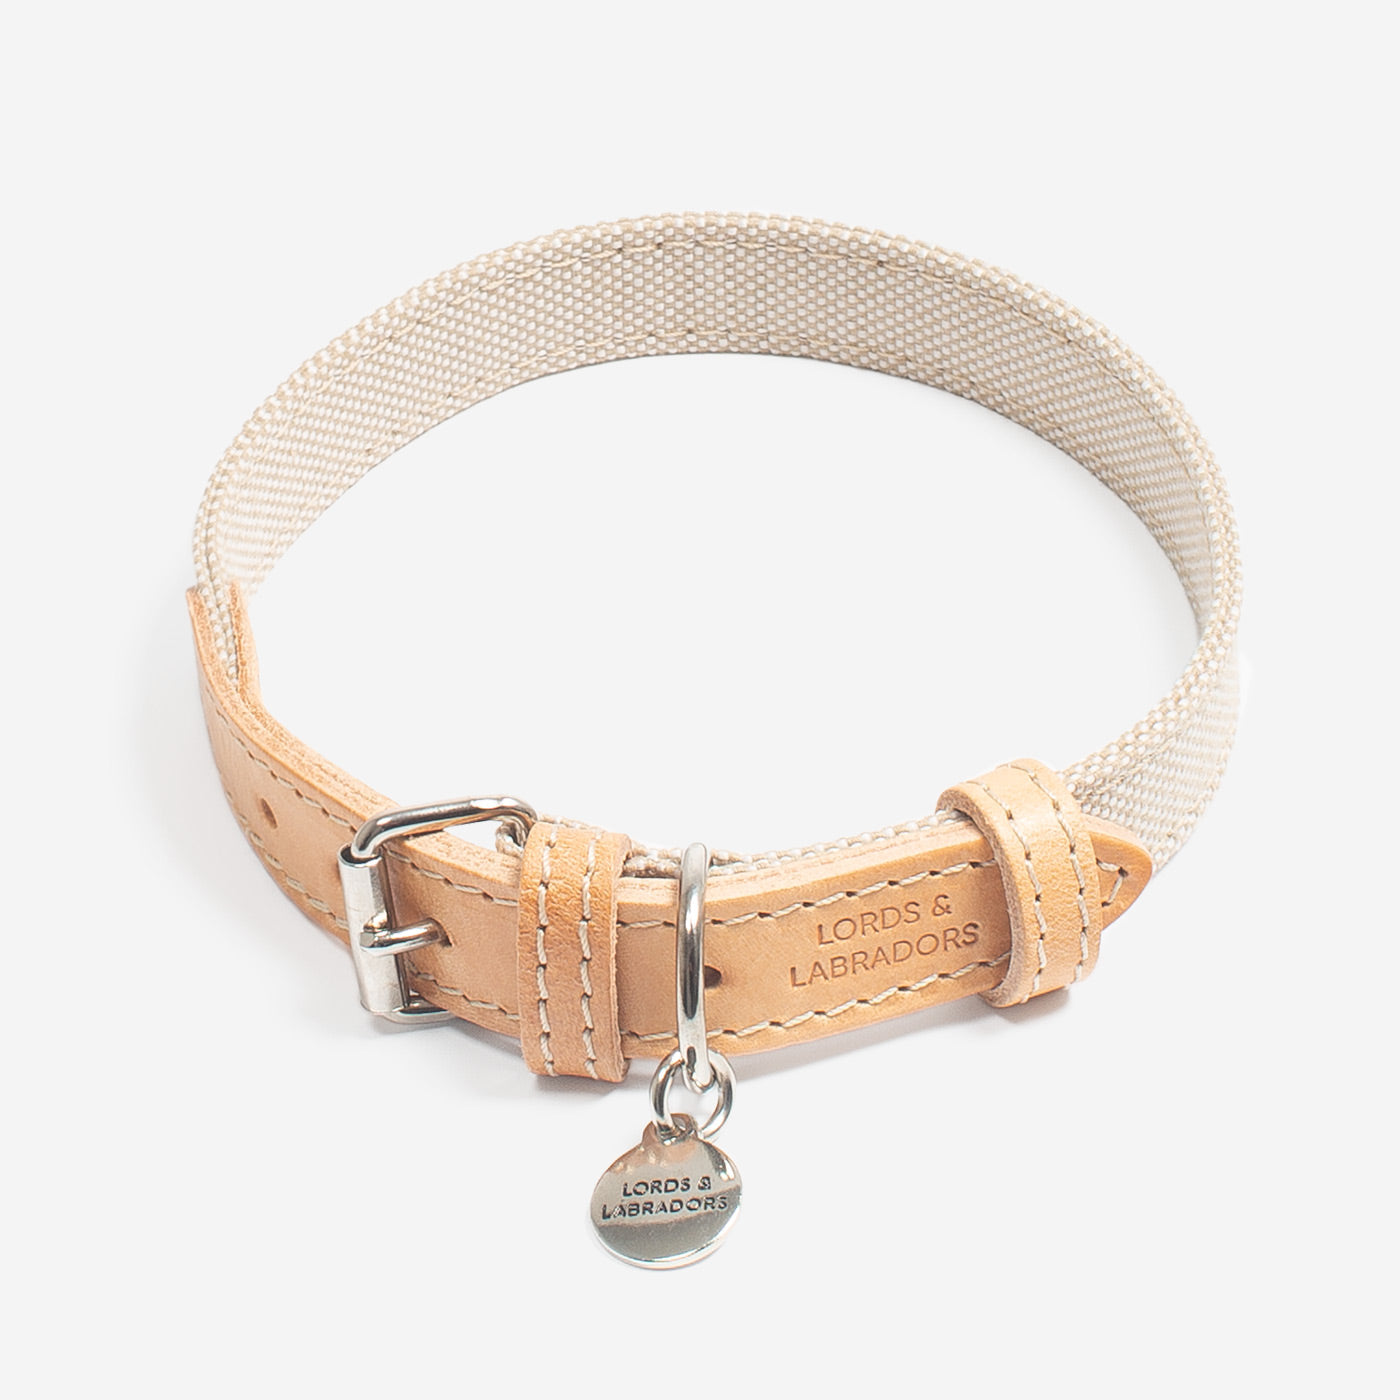 Discover dog walking luxury with our handcrafted Italian dog collar in beautiful essentials twill cream linen with cream fabric! The perfect collar for dogs available now at Lords & Labradors US